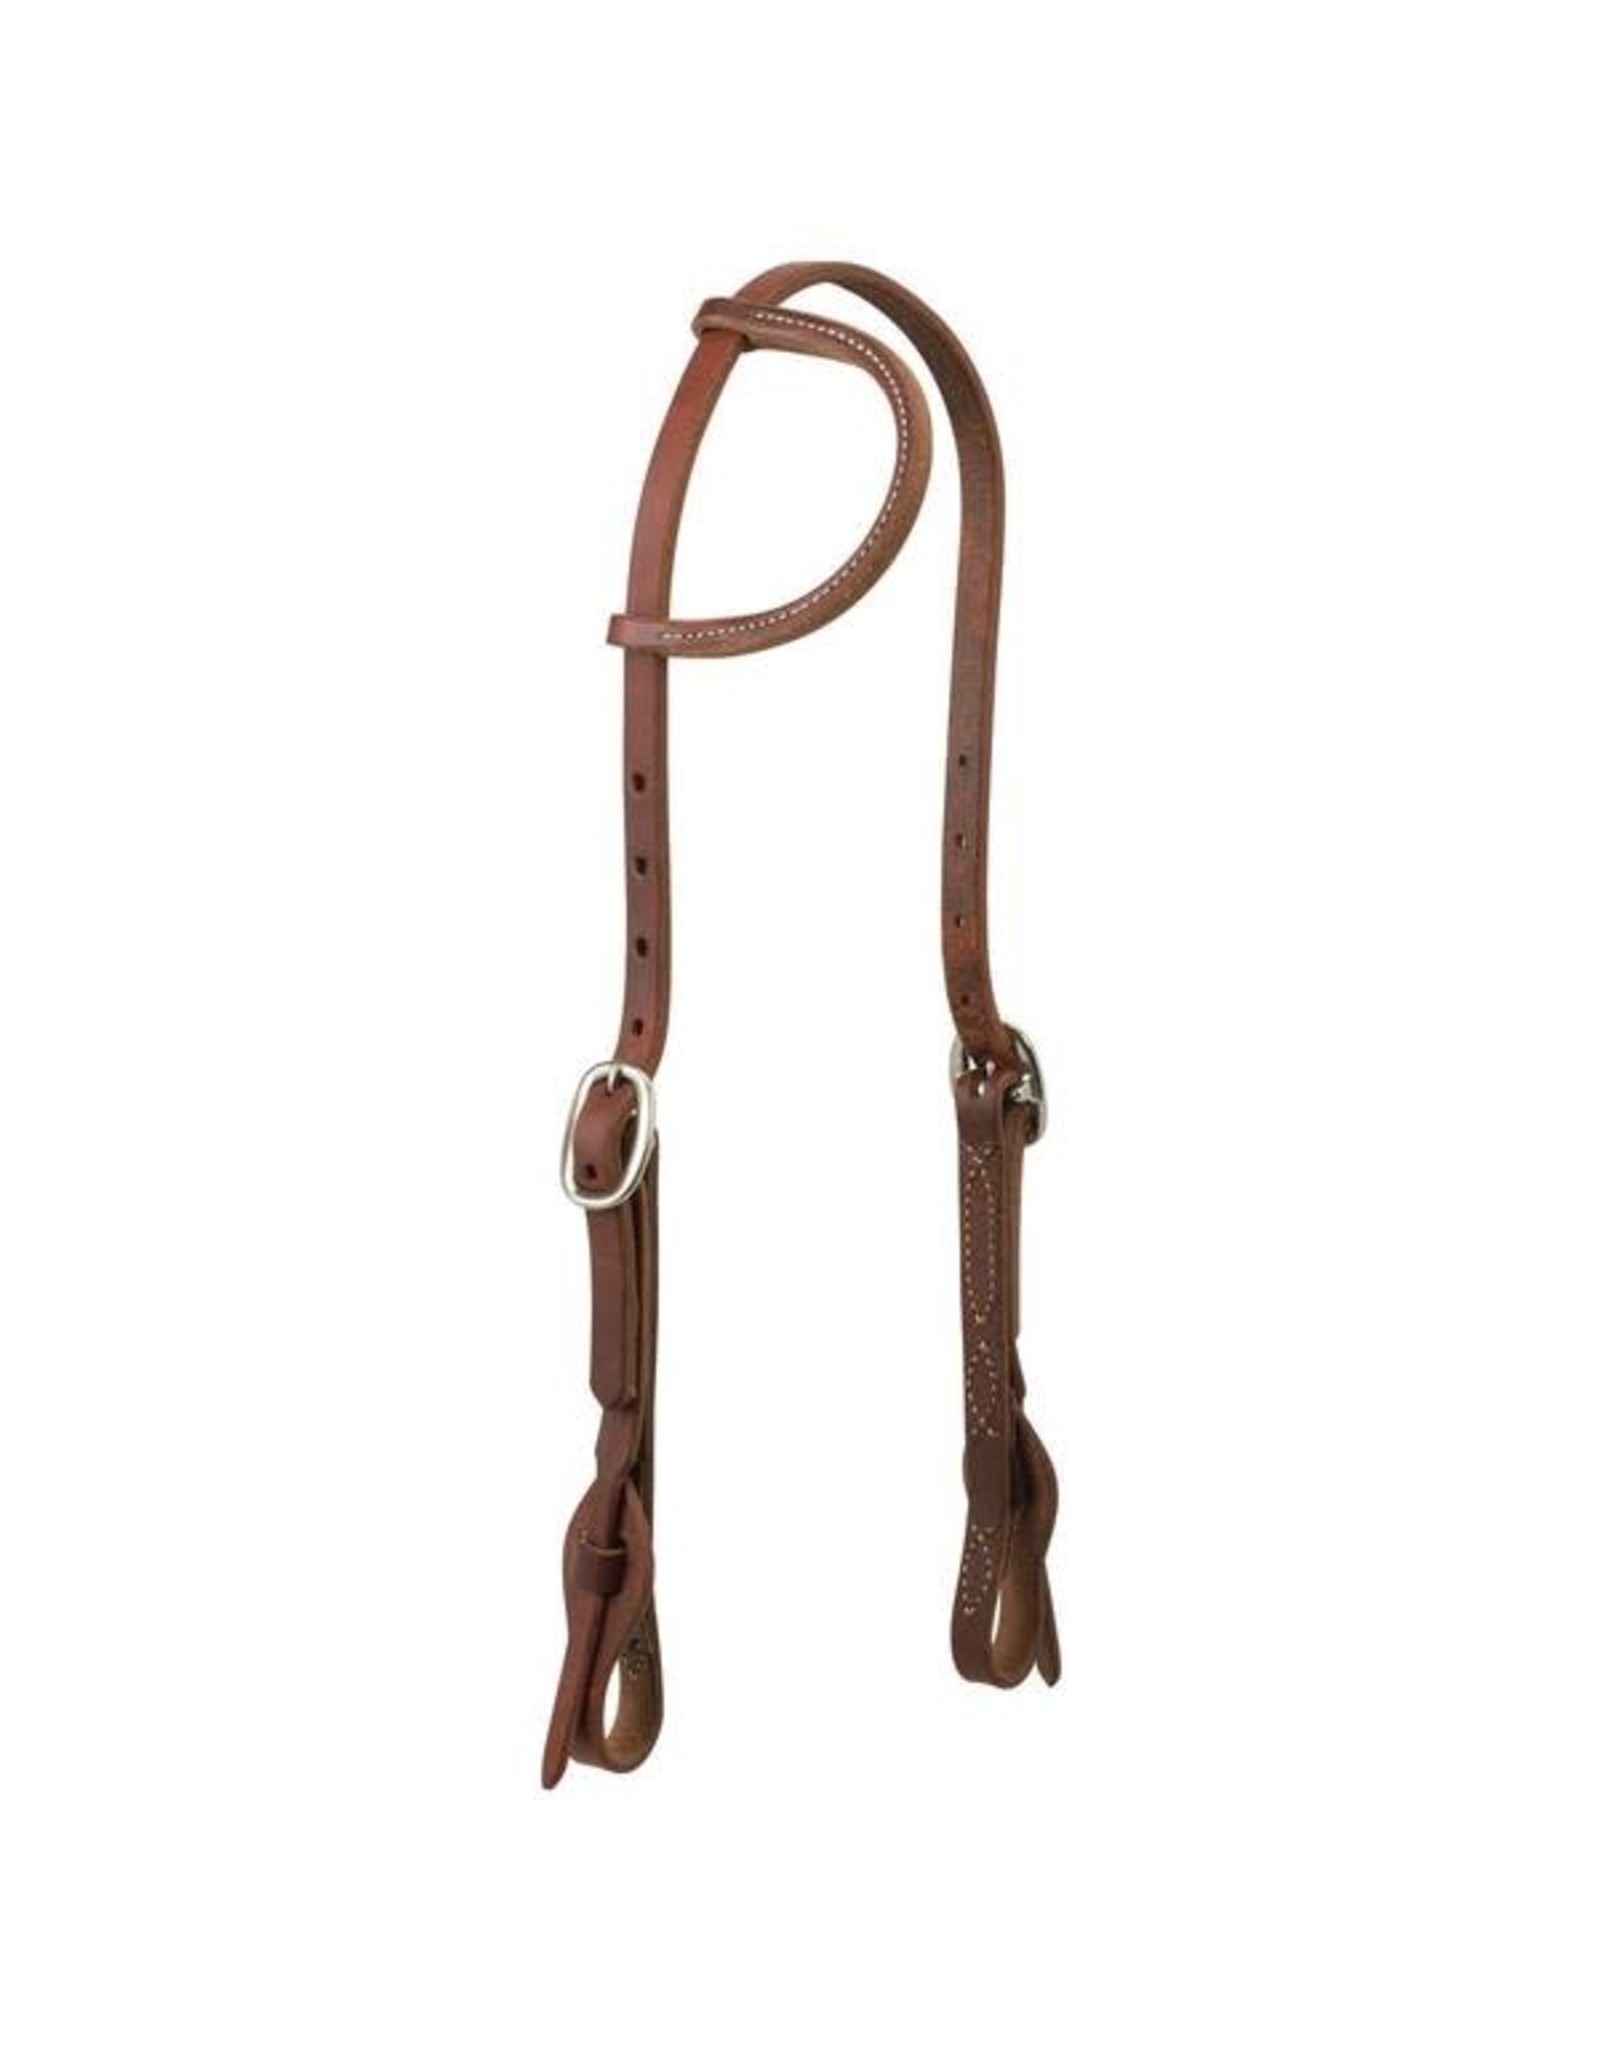 Weaver Work Tack Quick Change One Ear Headstall 10-0519